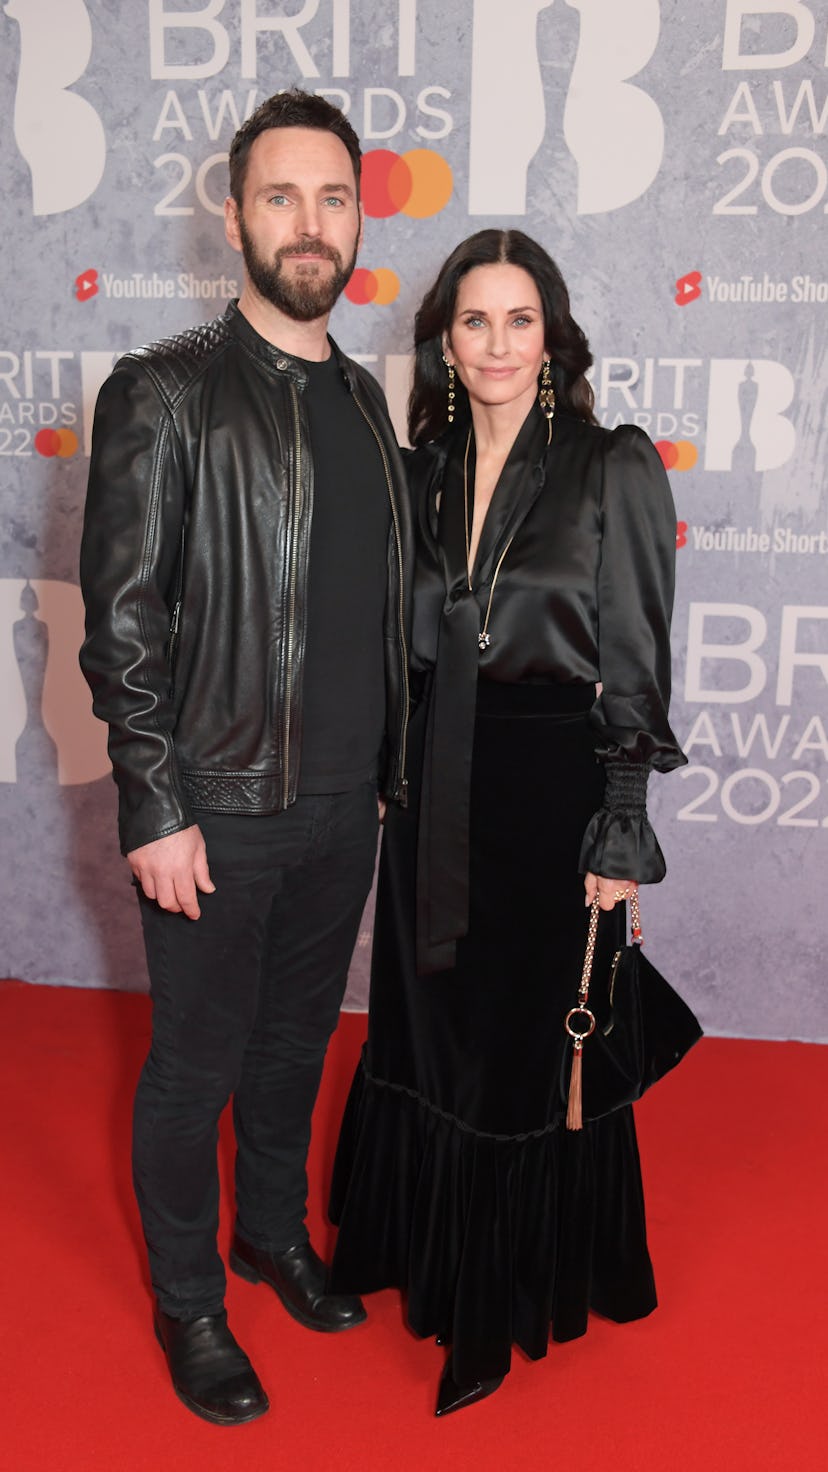 Johnny McDaid and Courteney Cox in all black at the Brit Awards 